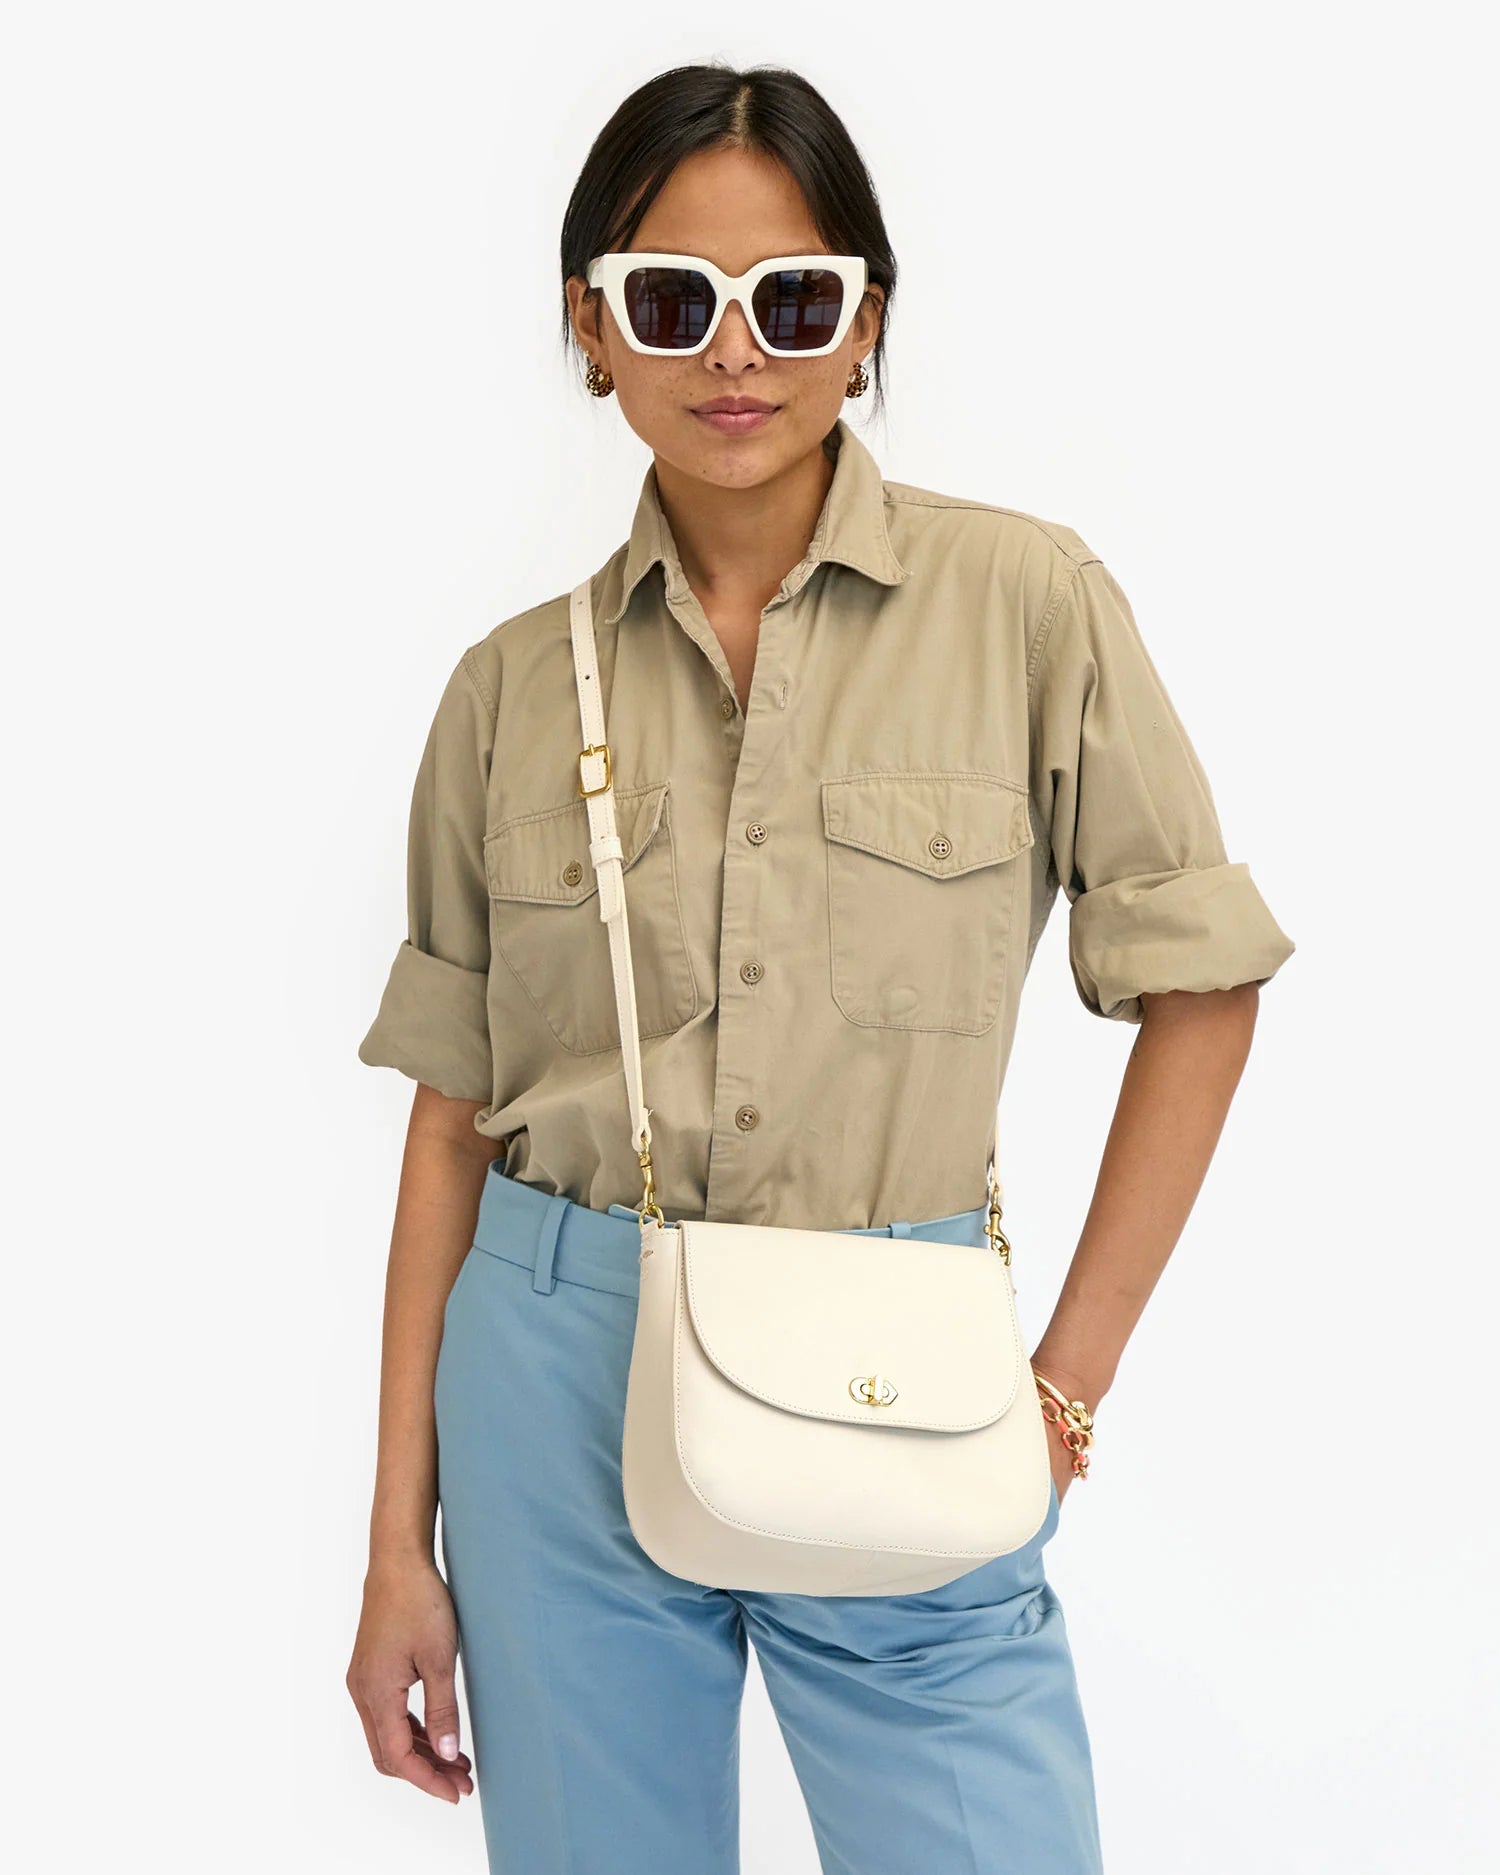 A woman wearing sunglasses, a beige shirt, and blue pants, accessorized with a Clare Vivier Turnlock Louis Cream crossbody bag holding keys and gold jewelry, standing against a plain background.